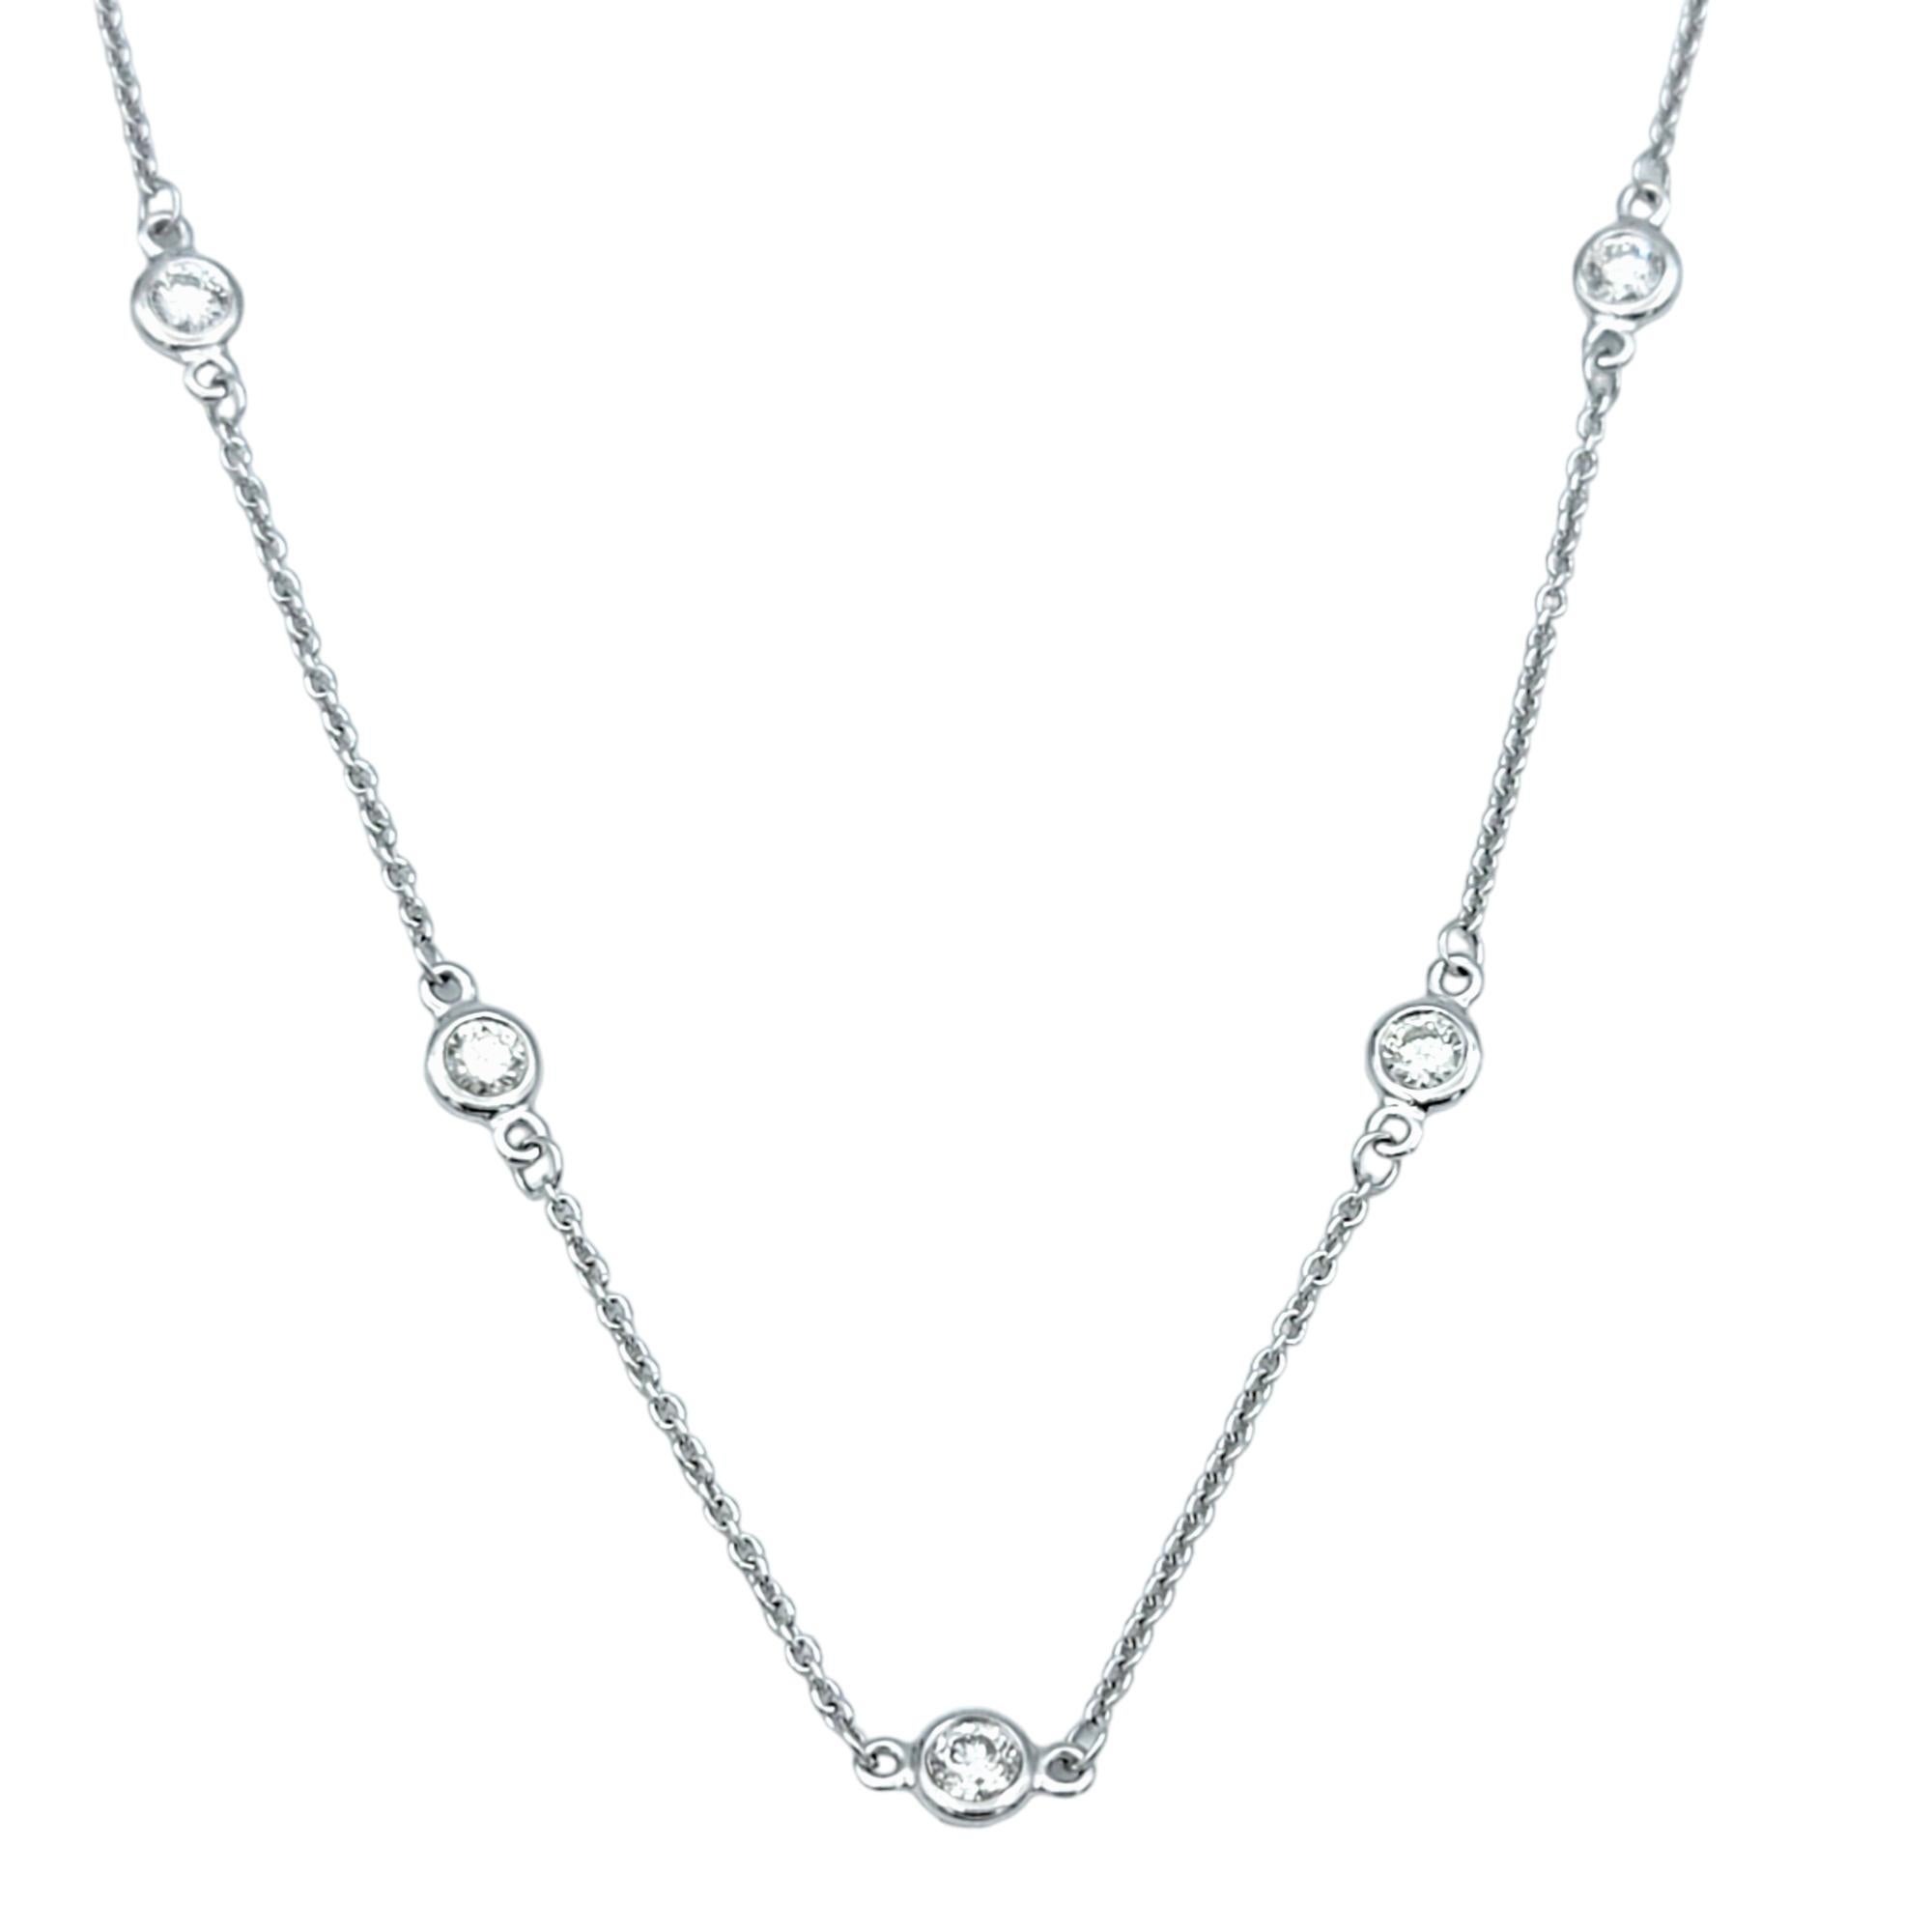 This stunning Effy diamond station necklace embodies elegance and versatility. Crafted in lustrous 14 karat white gold, this necklace features a delicate cable chain adorned with dazzling bezel-set diamonds.

Each diamond station on the chain adds a